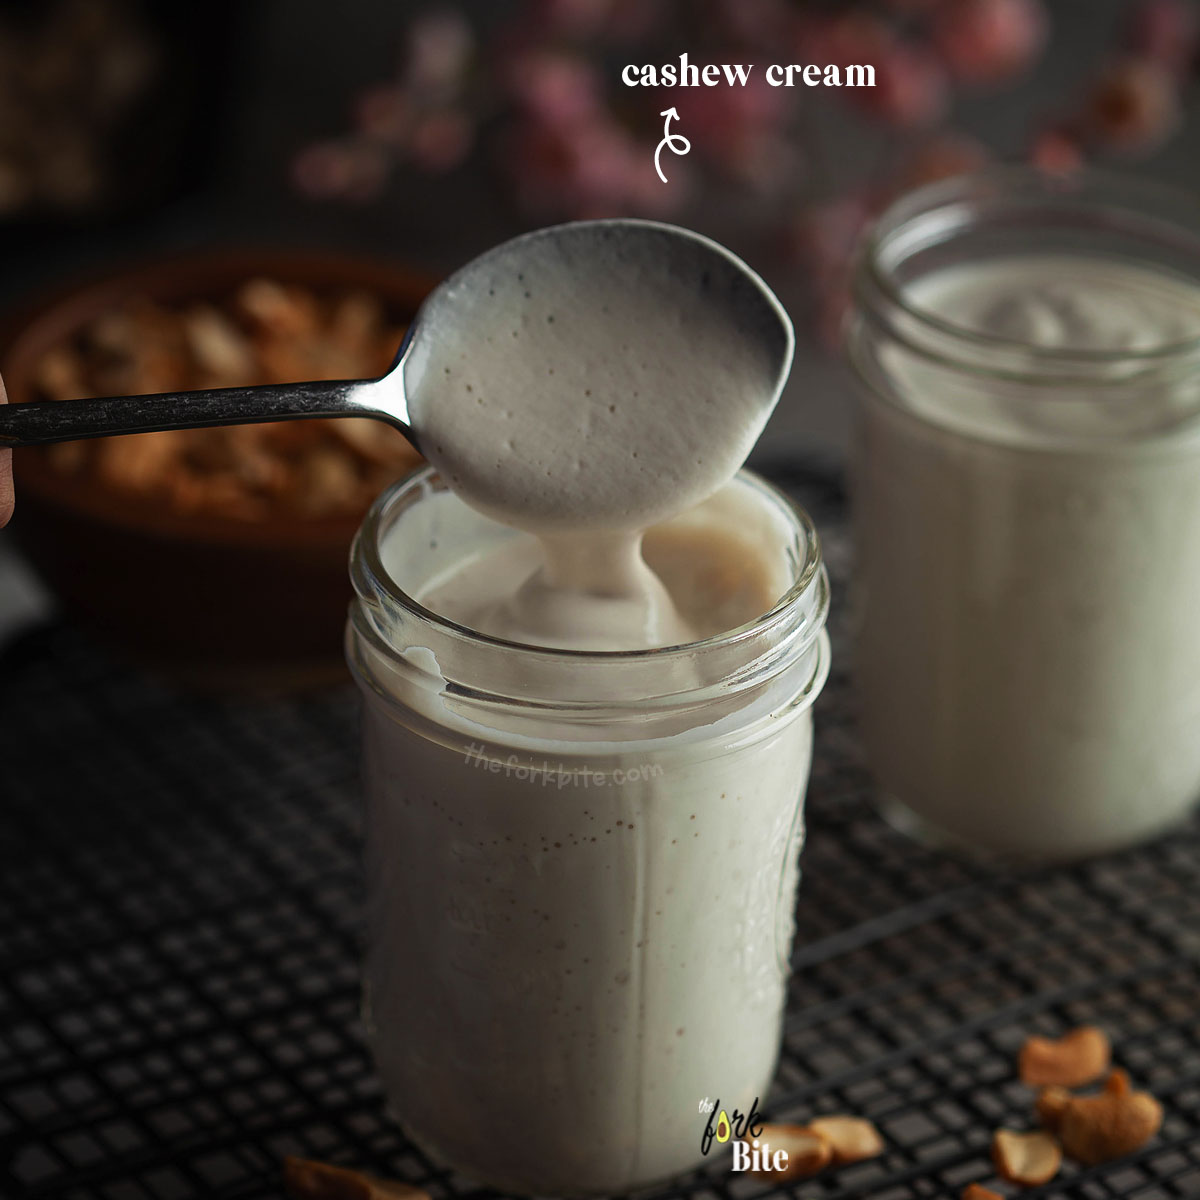 This cashew cream has all the flavors going on, but it still has a neutral quality that makes it a great addition to any dish.